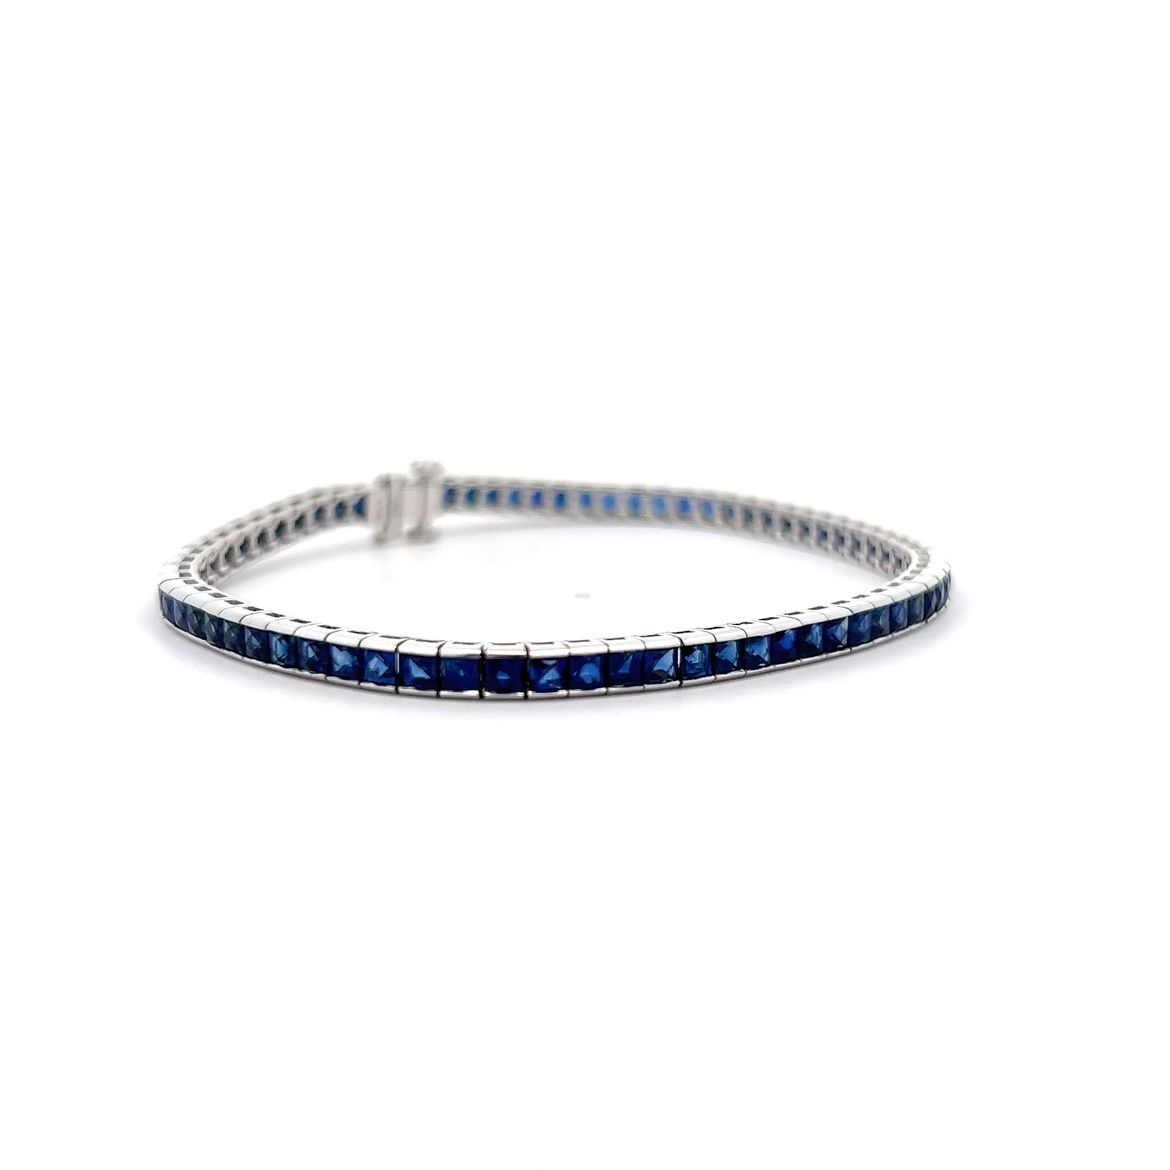 10 Ct Oval Cut Simulated Sapphire Tennis Bracelet 925 Silver Gold Plated |  eBay